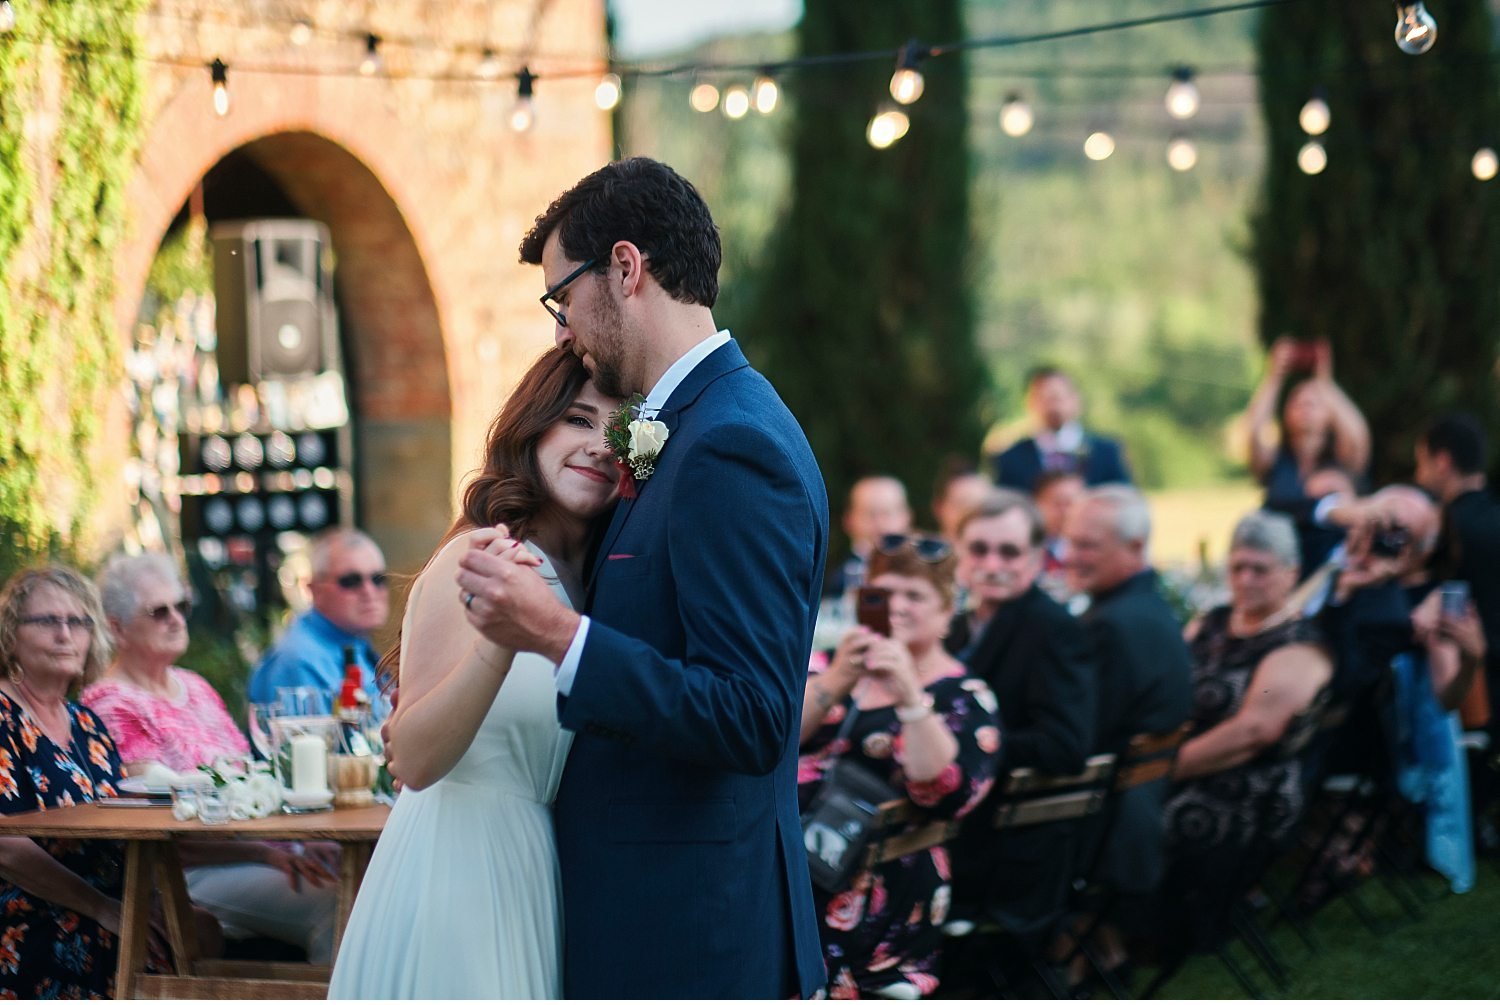  Elegant wedding in Tuscany in the garden of a Villa Cini in Arezzo - Immortalize your special day with this splendid photo of an enchanting wedding in one of the most beautiful Tuscan villas. The ceremony in the garden underlines the romantic and re